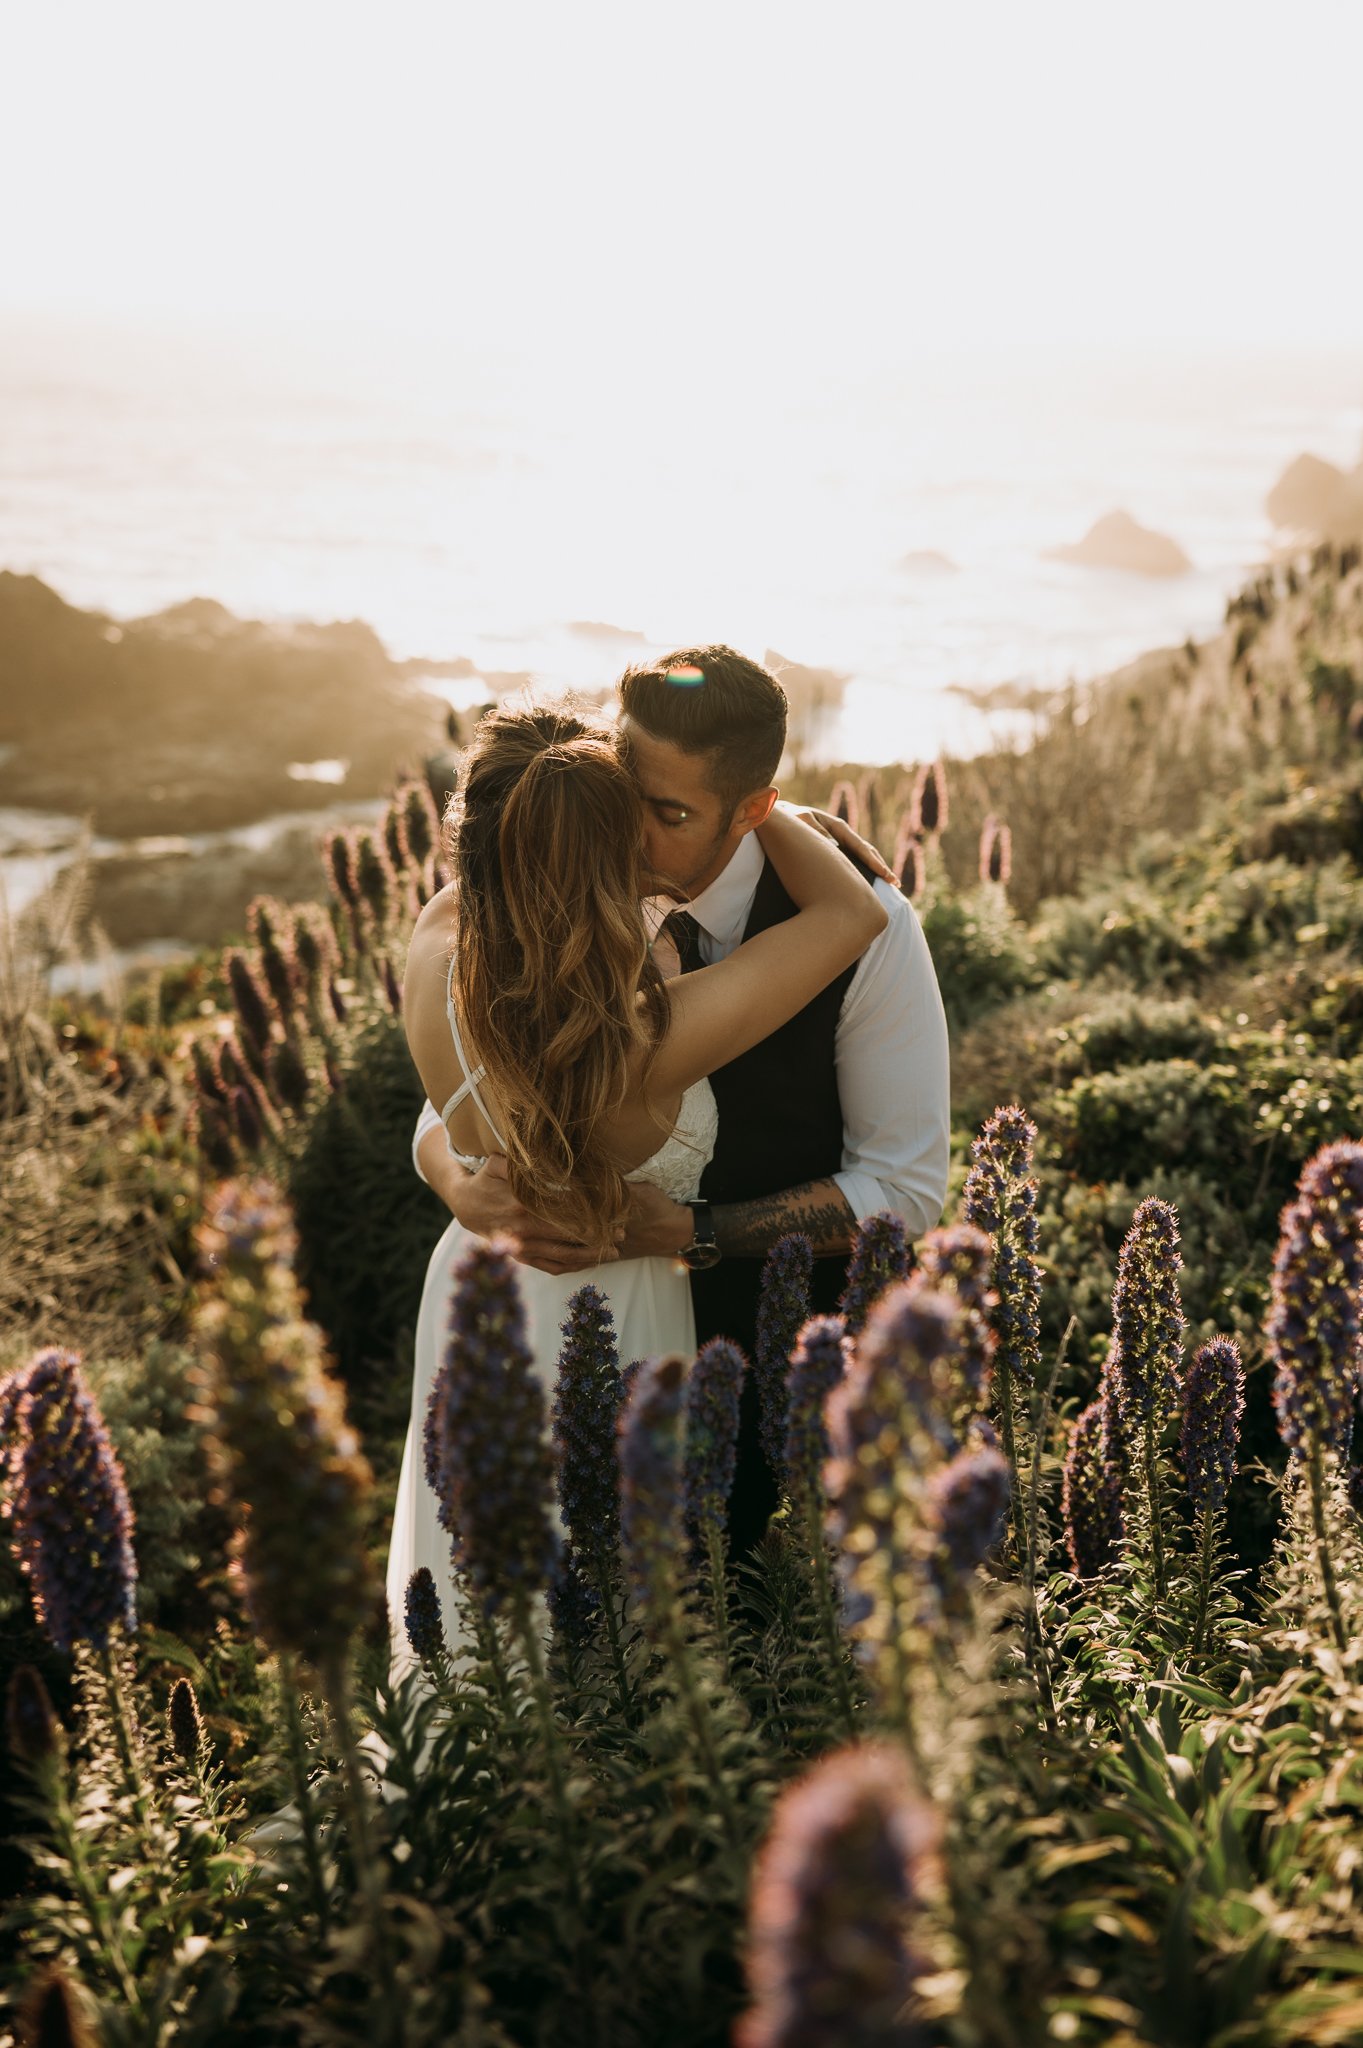 Newlyweds photo session couple hugging in flowers cliffside Big Sur California